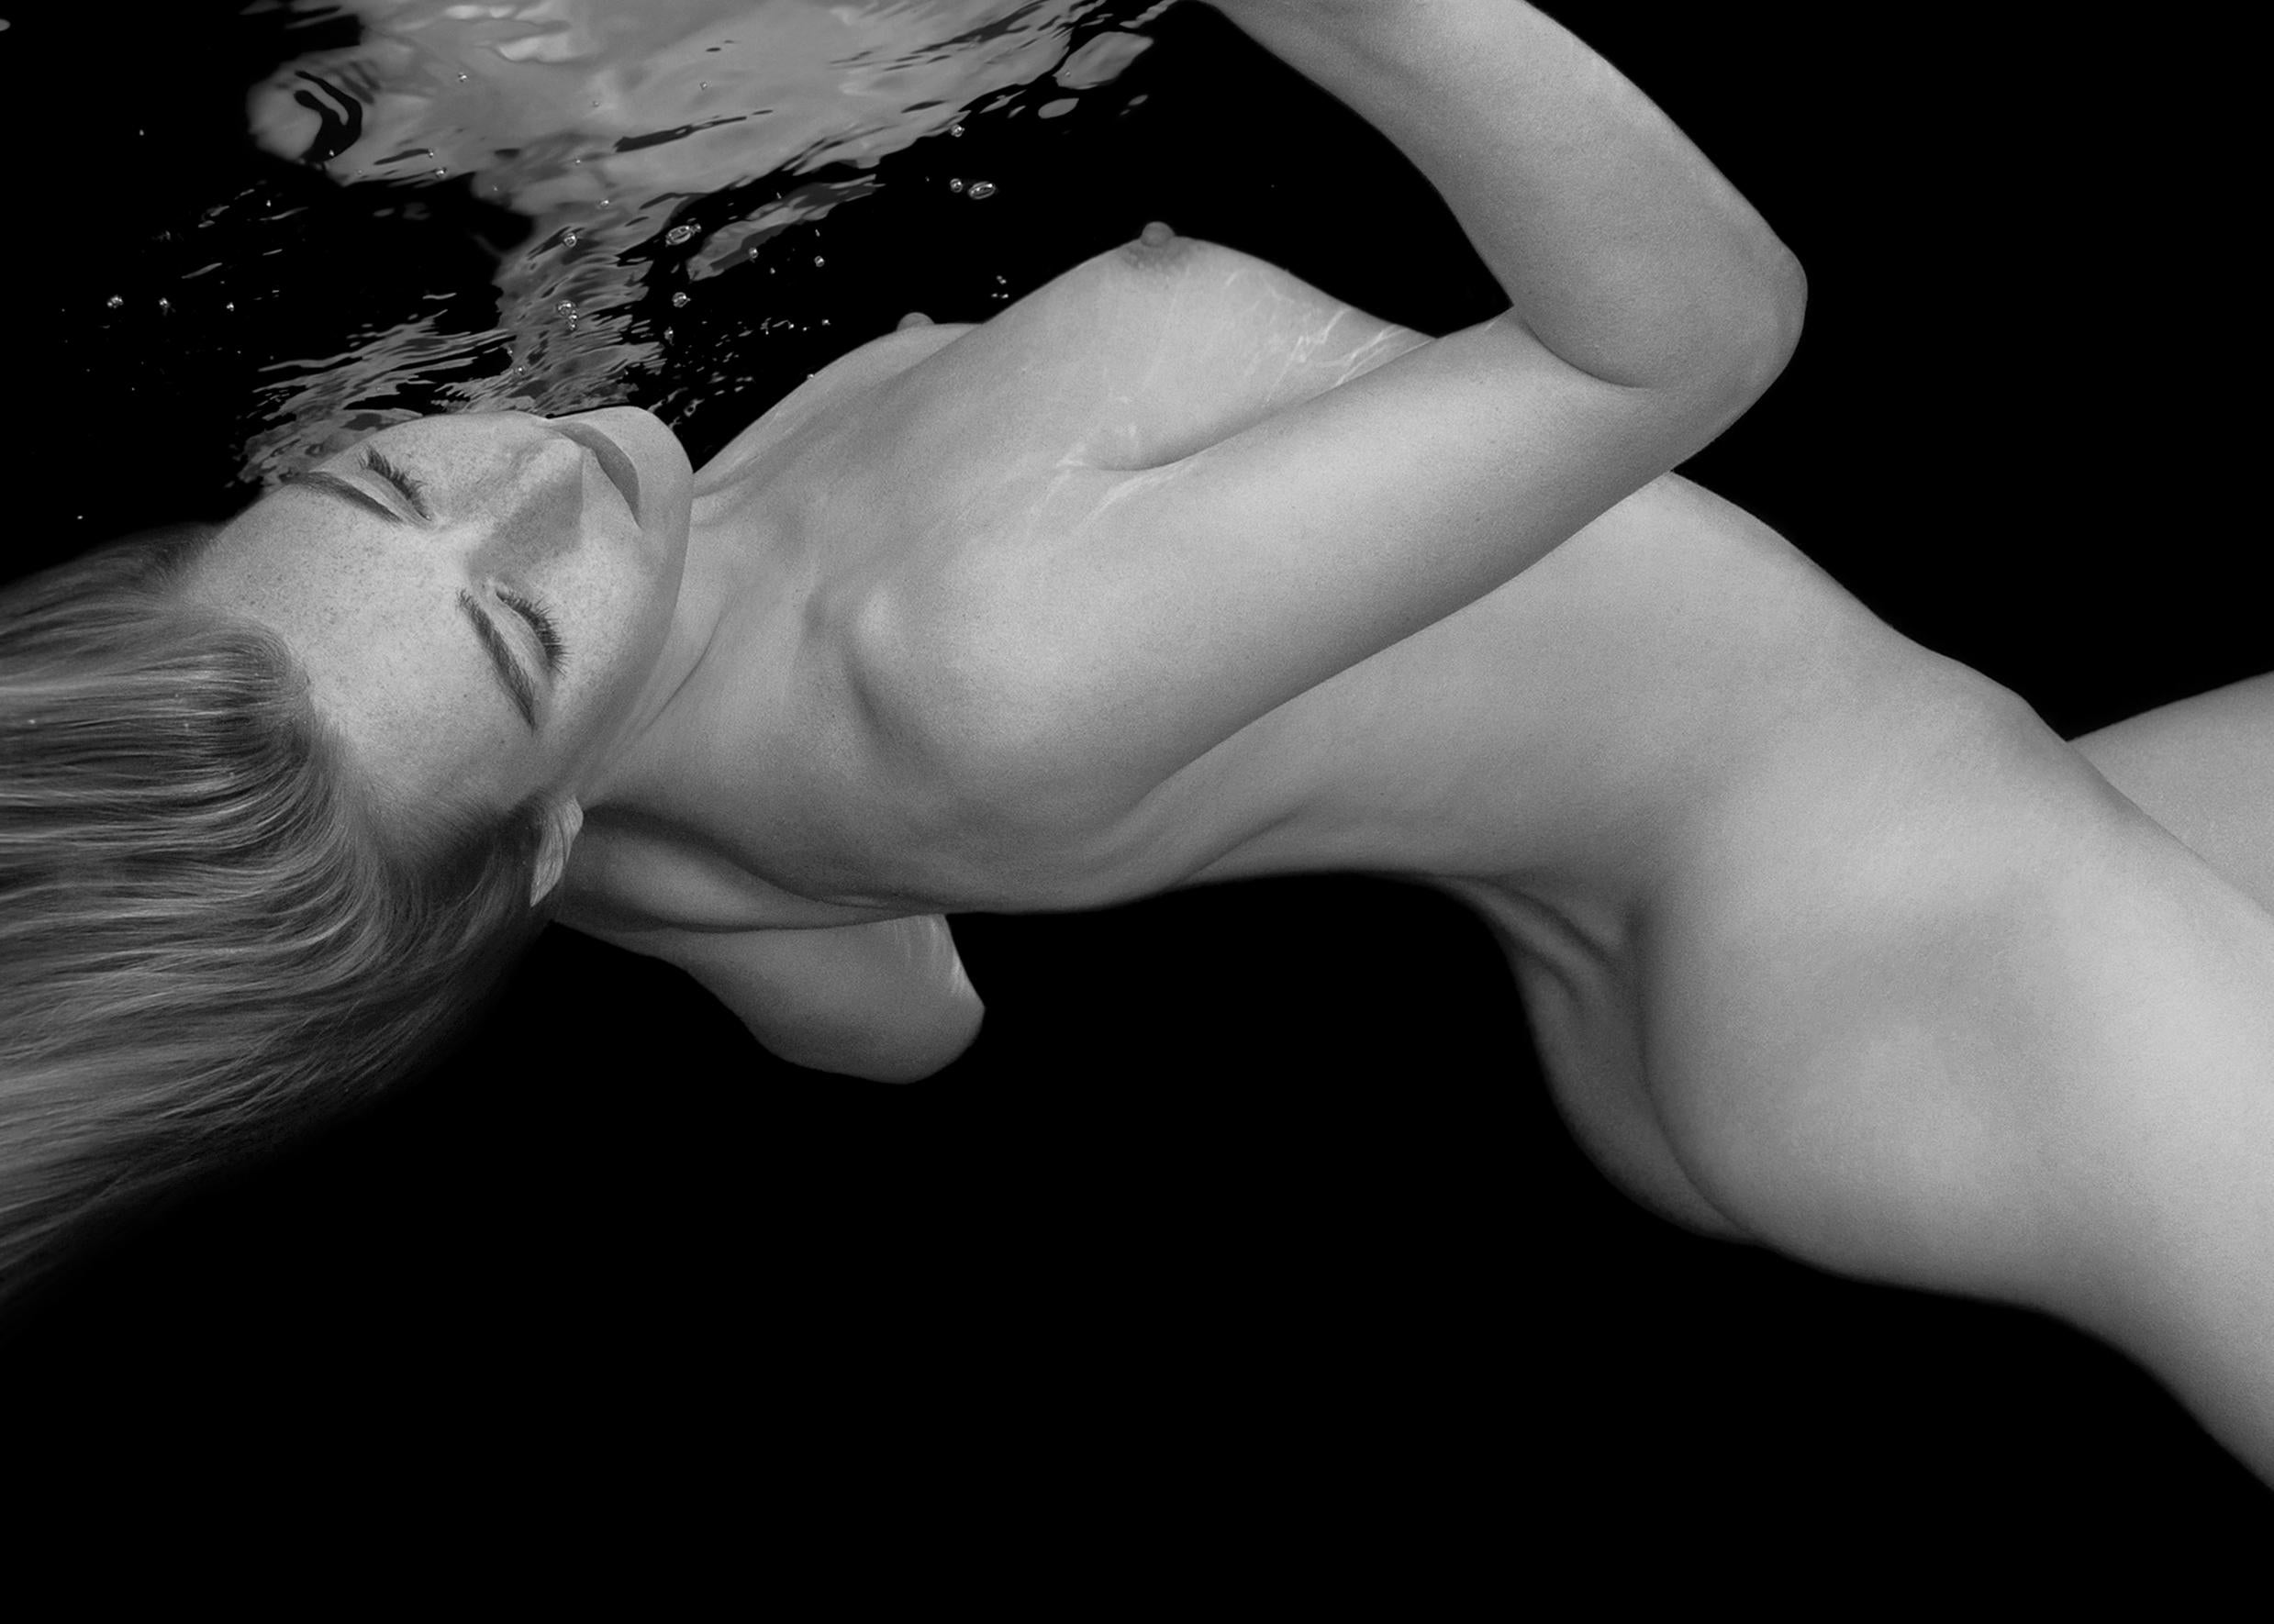 The Touch - underwater black & white nude photograph - archival pigment 24 x 35